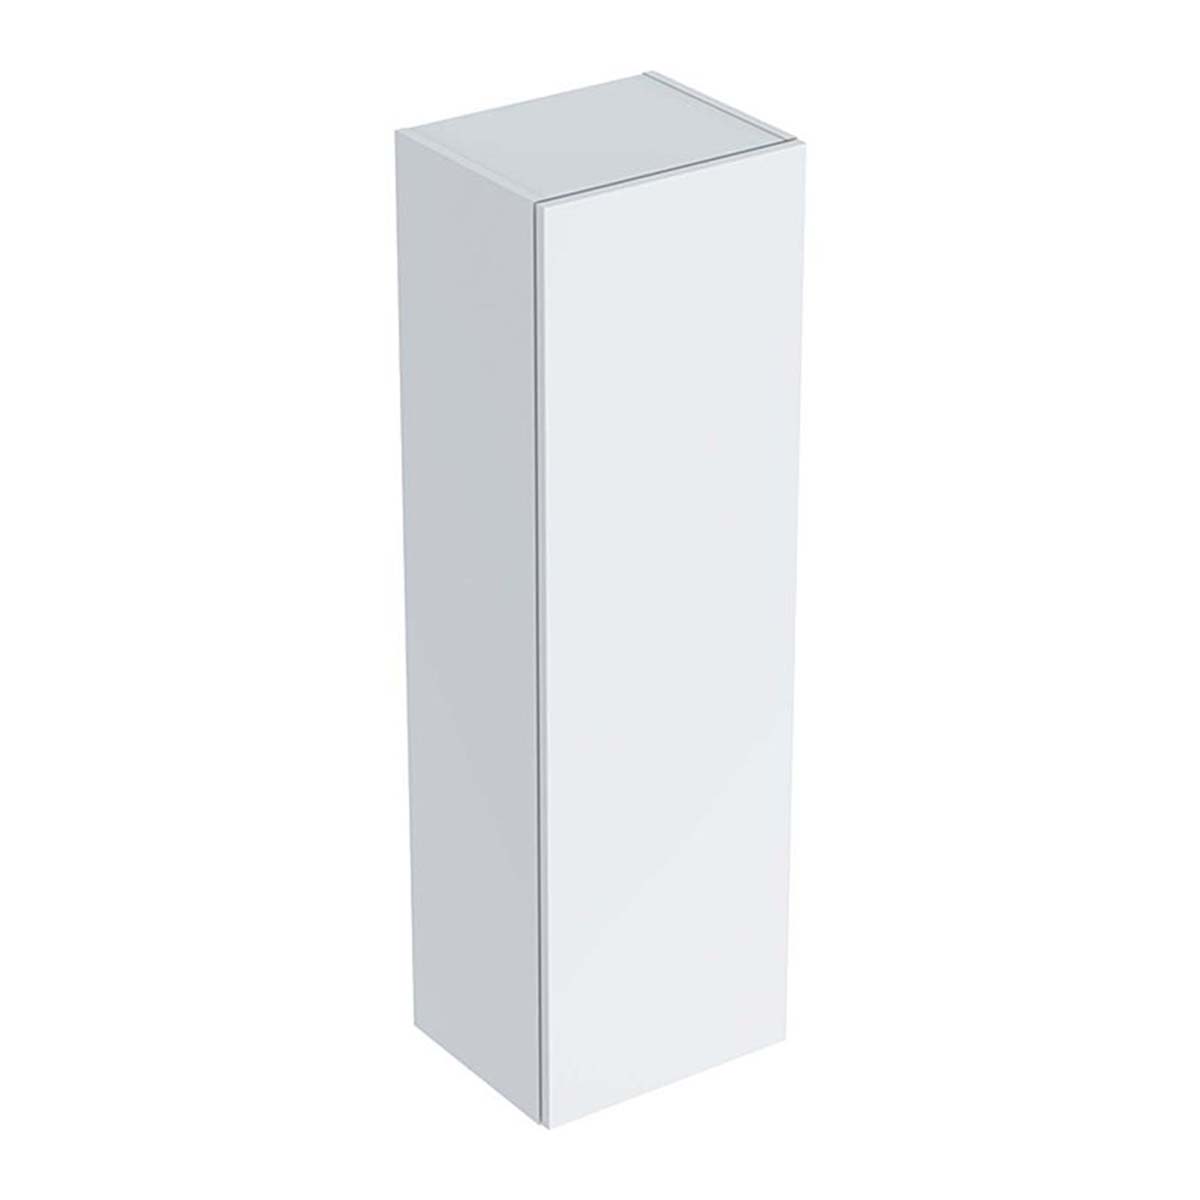 Geberit Smyle Square middle cupboard white high gloss